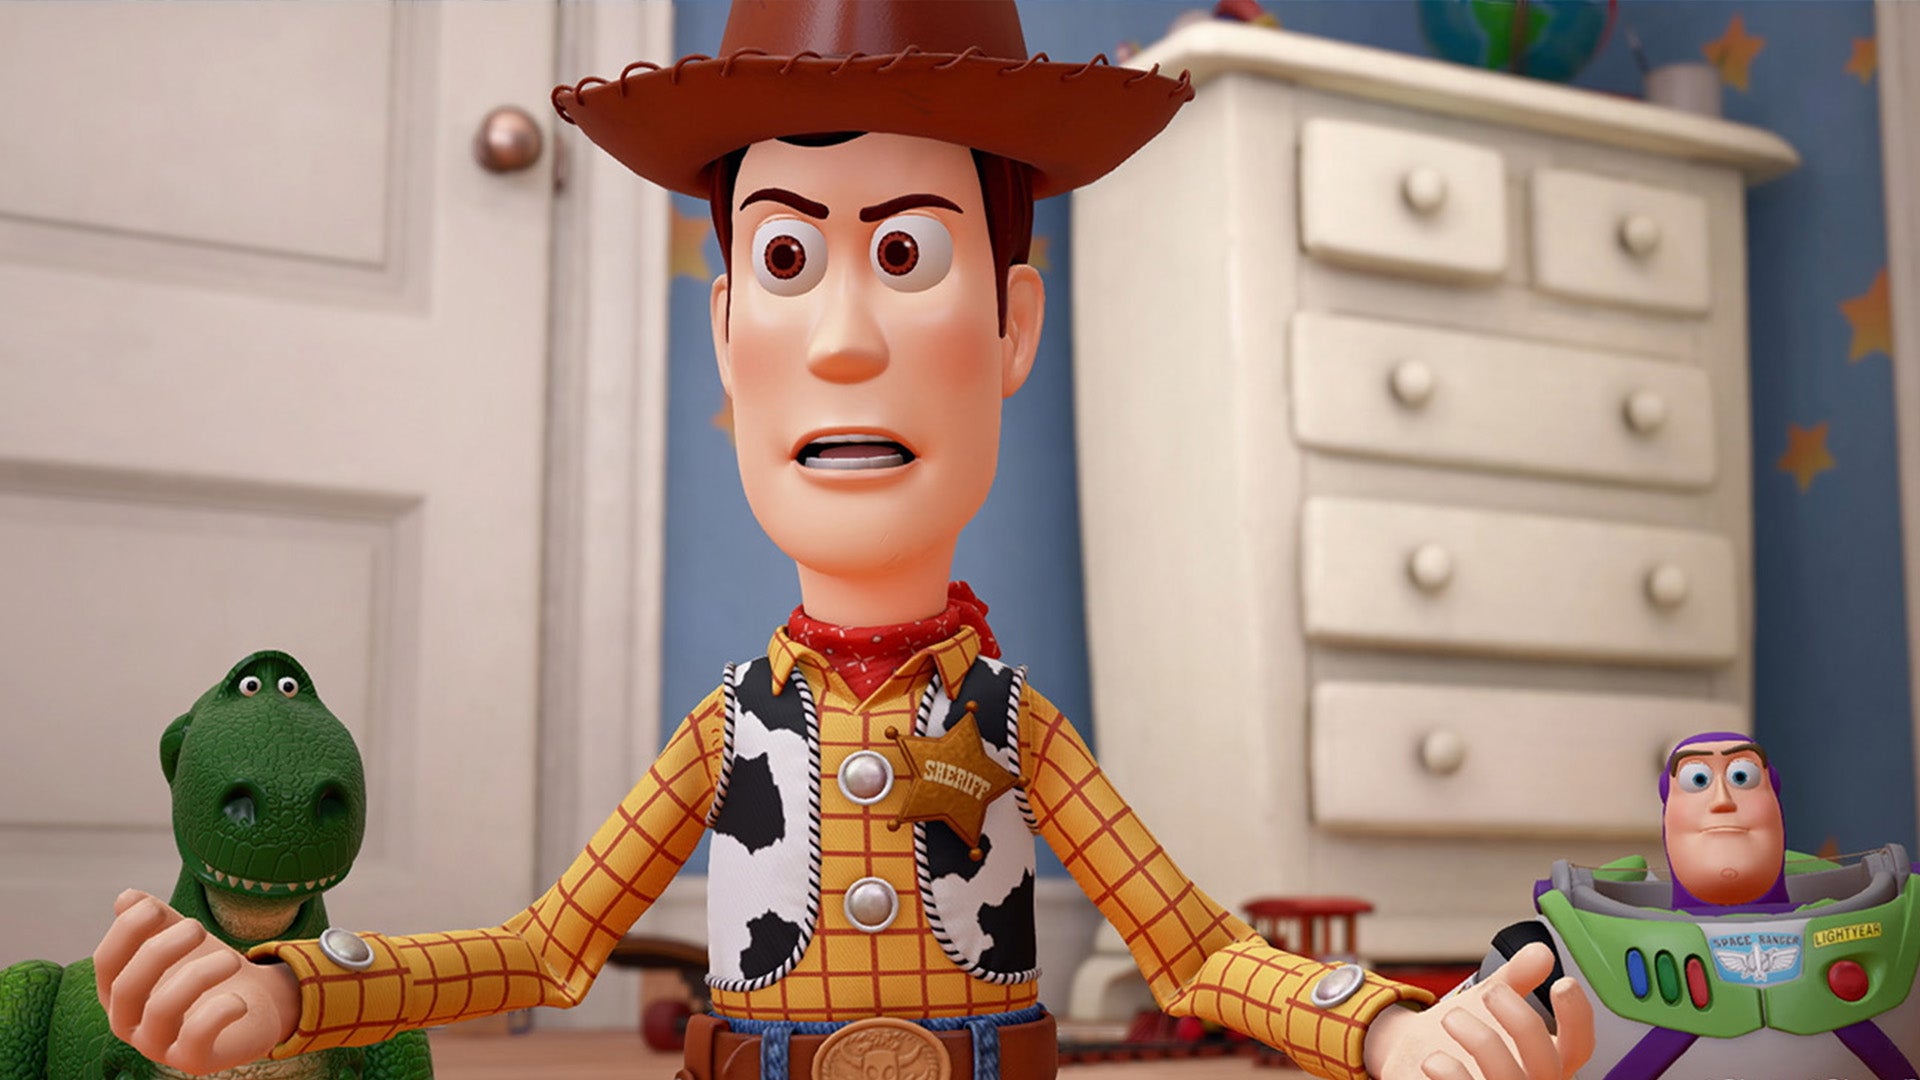 Image for Kingdom Hearts 3 vs Toy Story Graphics Comparison